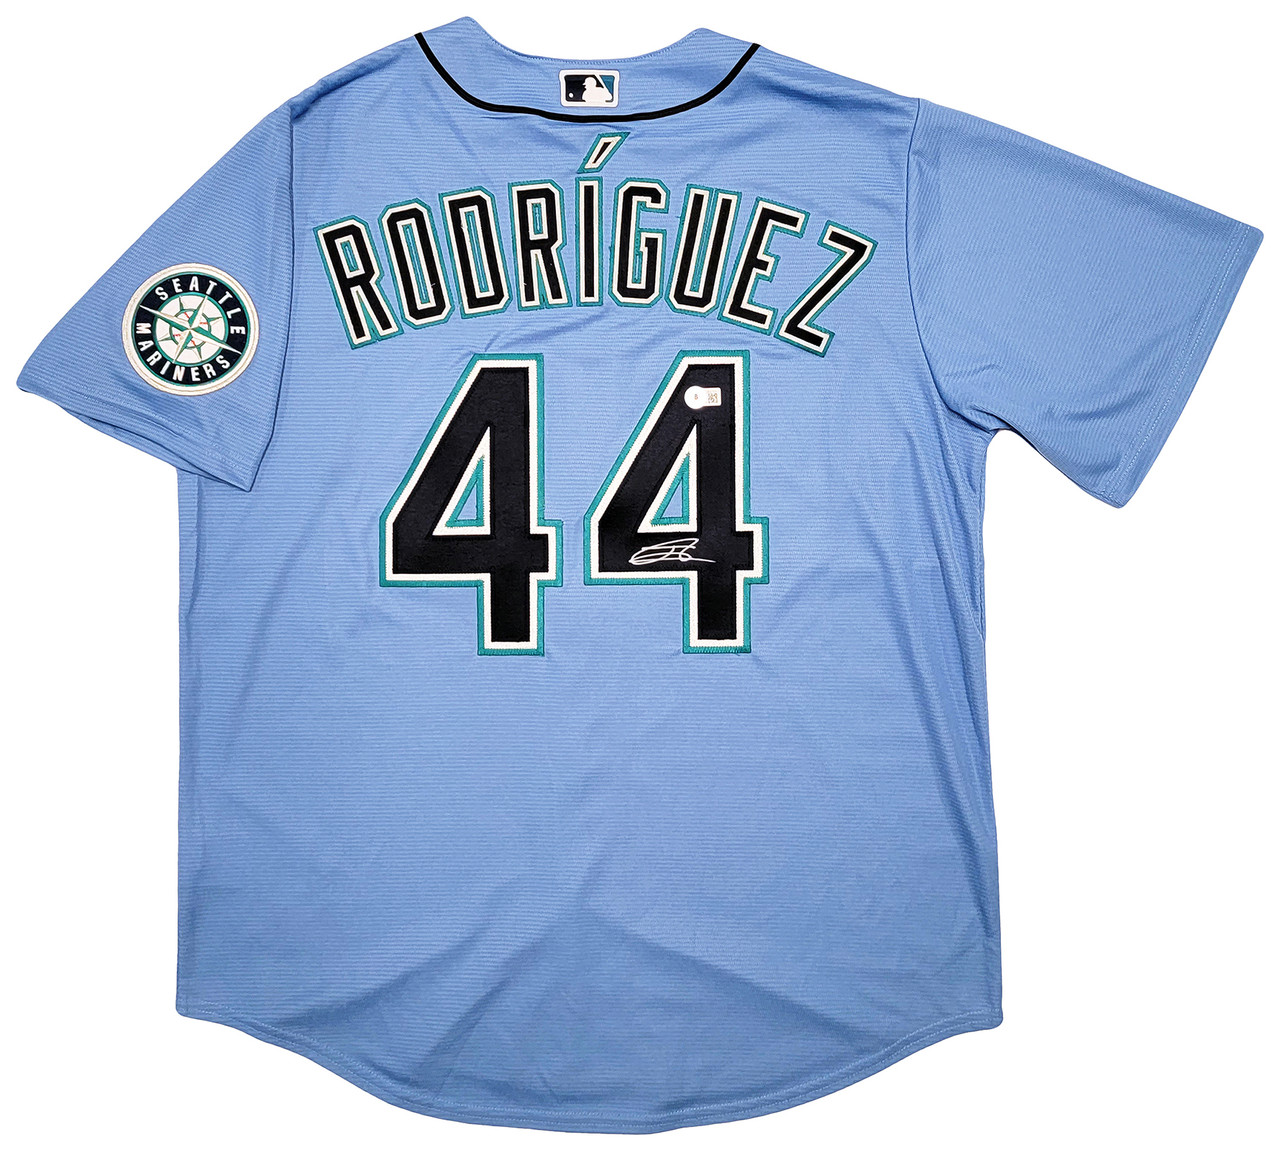 Julio Rodriguez Seattle Mariners Nike White Home Replica Player Jersey